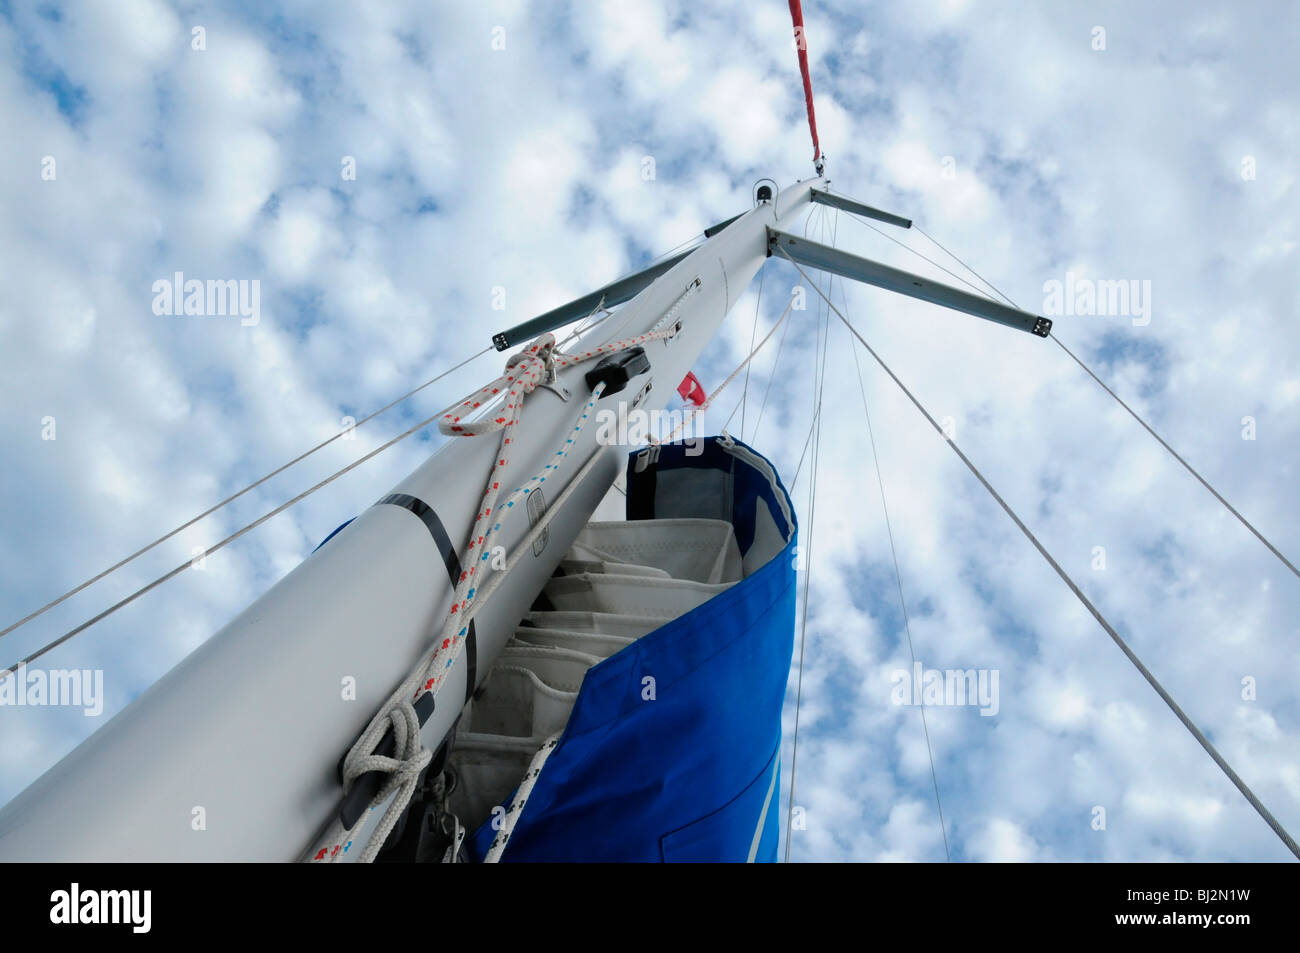 Wide angle shot up the mast of a sailing yacht Stock Photo